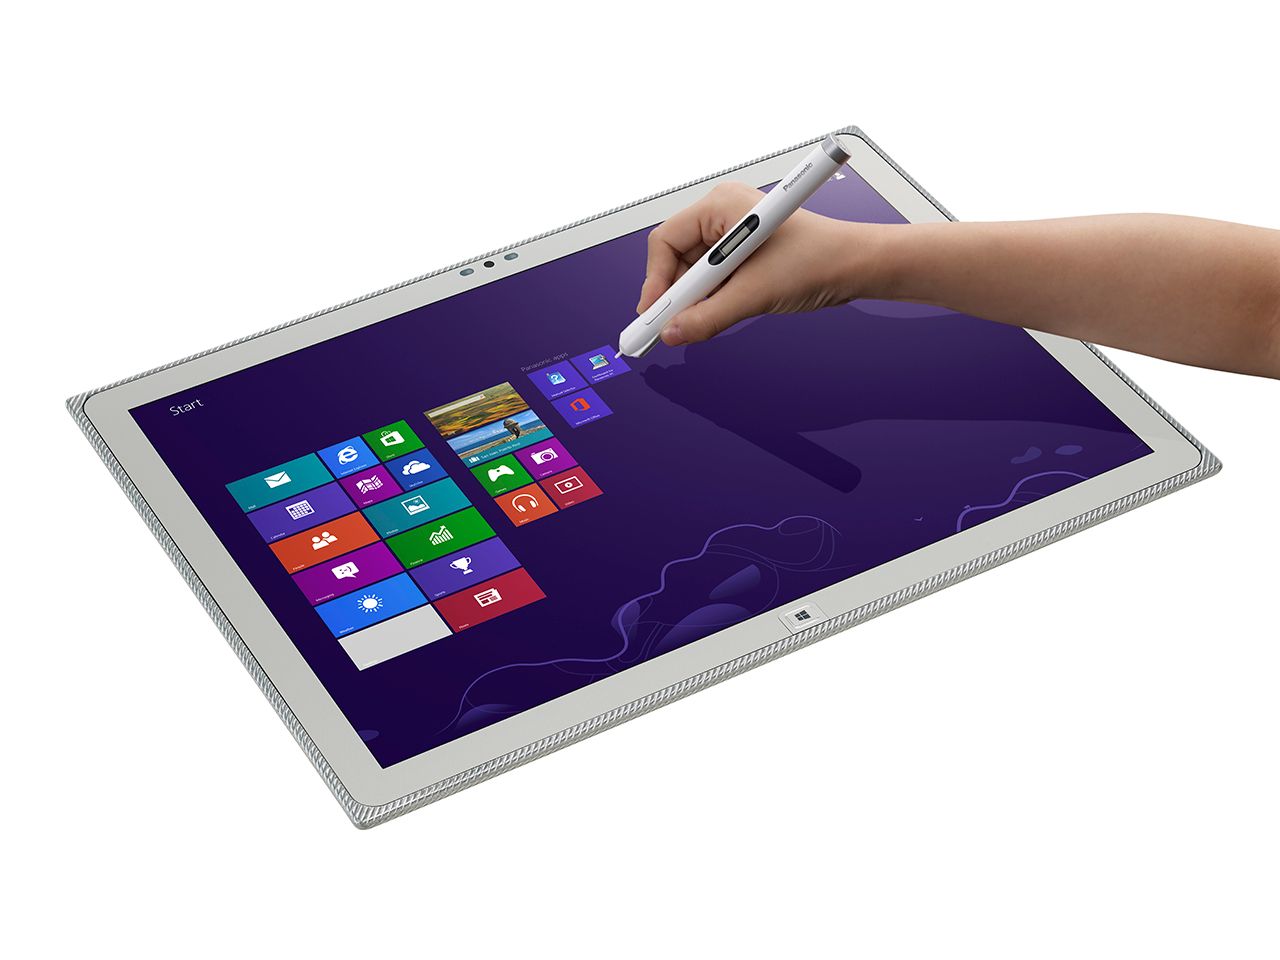 panasonic toughpad 4k tablet wows at ifa but 20 incher just for professionals image 1